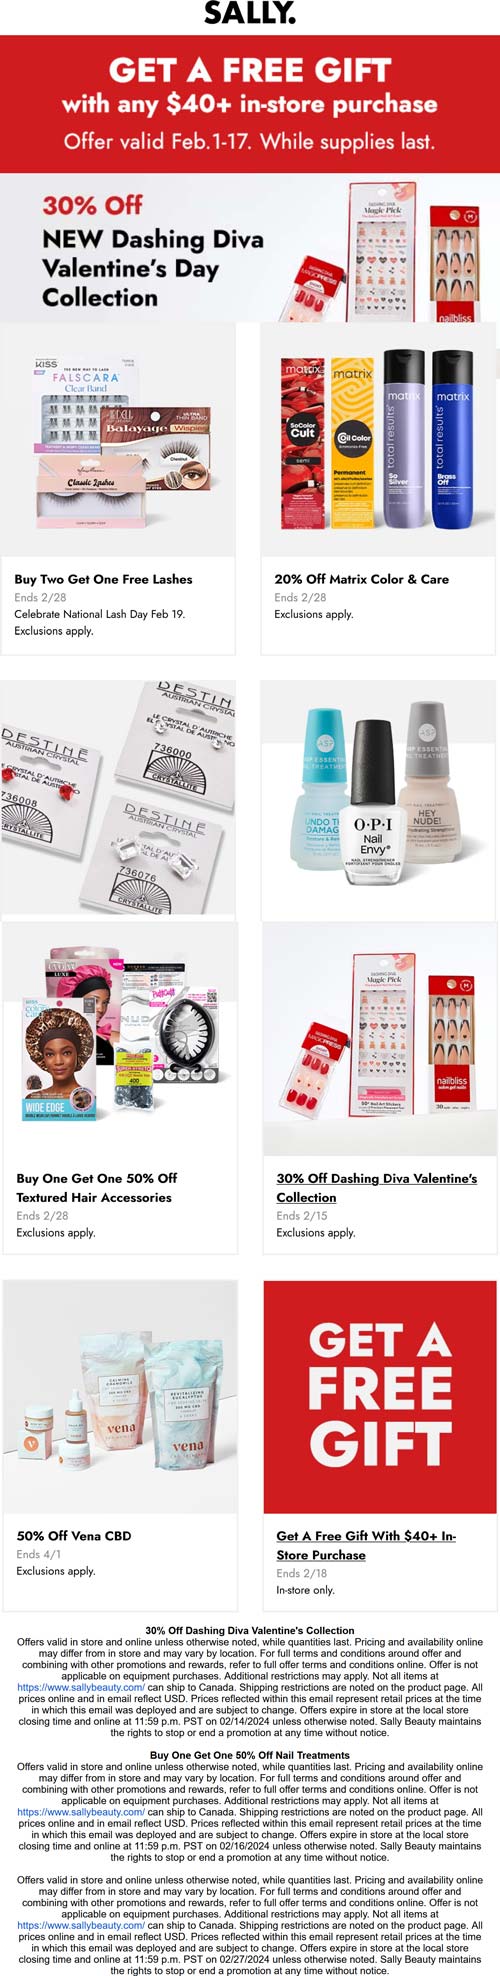 Sally stores Coupon  Free gift on $40, 30% off valentines collection & more at Sally #sally 